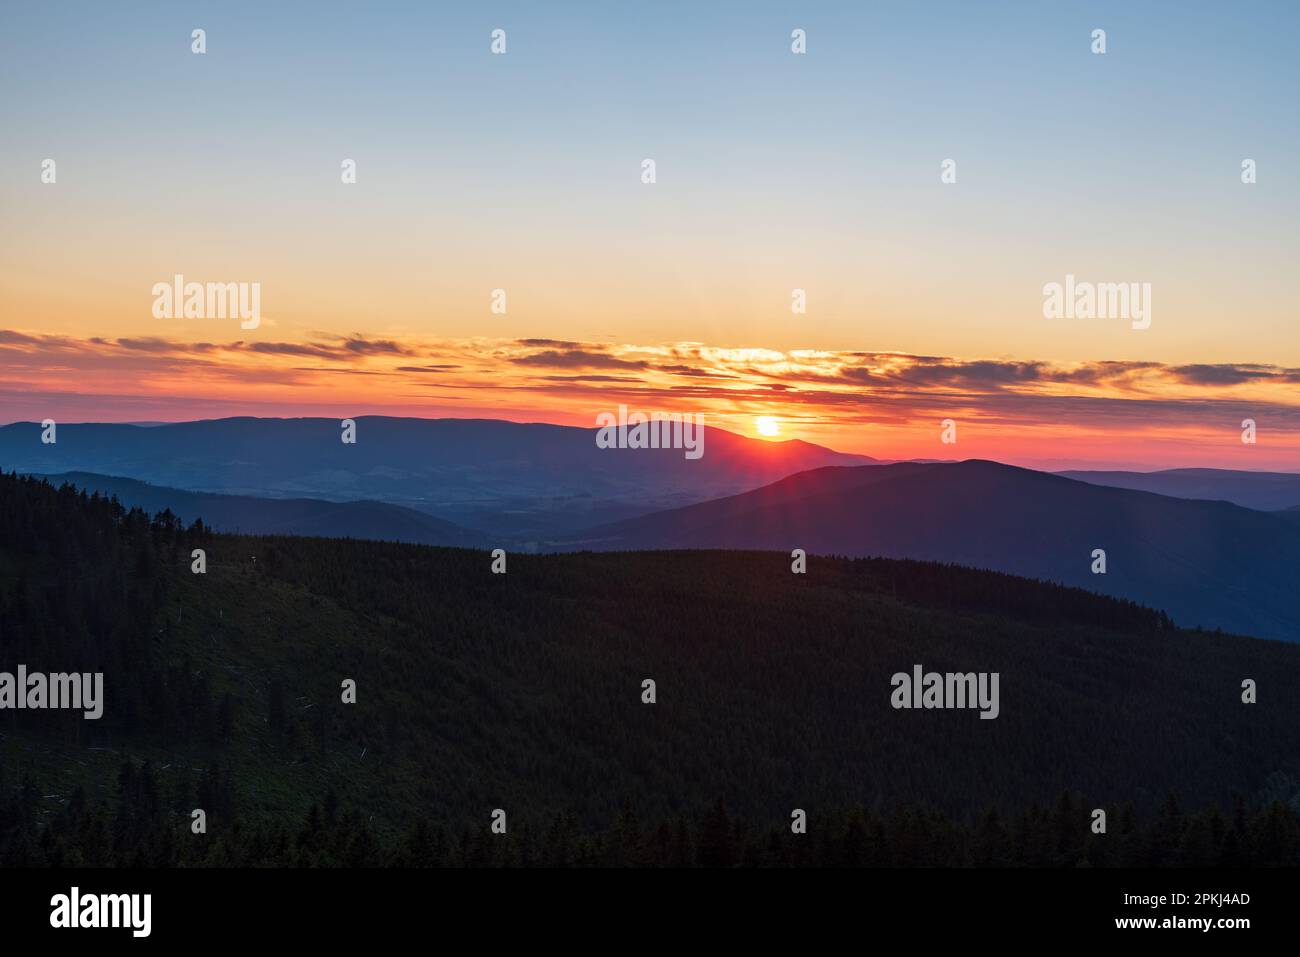 Sunset with hills and colorful sky with few clouds from Dlouhe strane hill in Jeseniky mountains in Czech republic Stock Photo